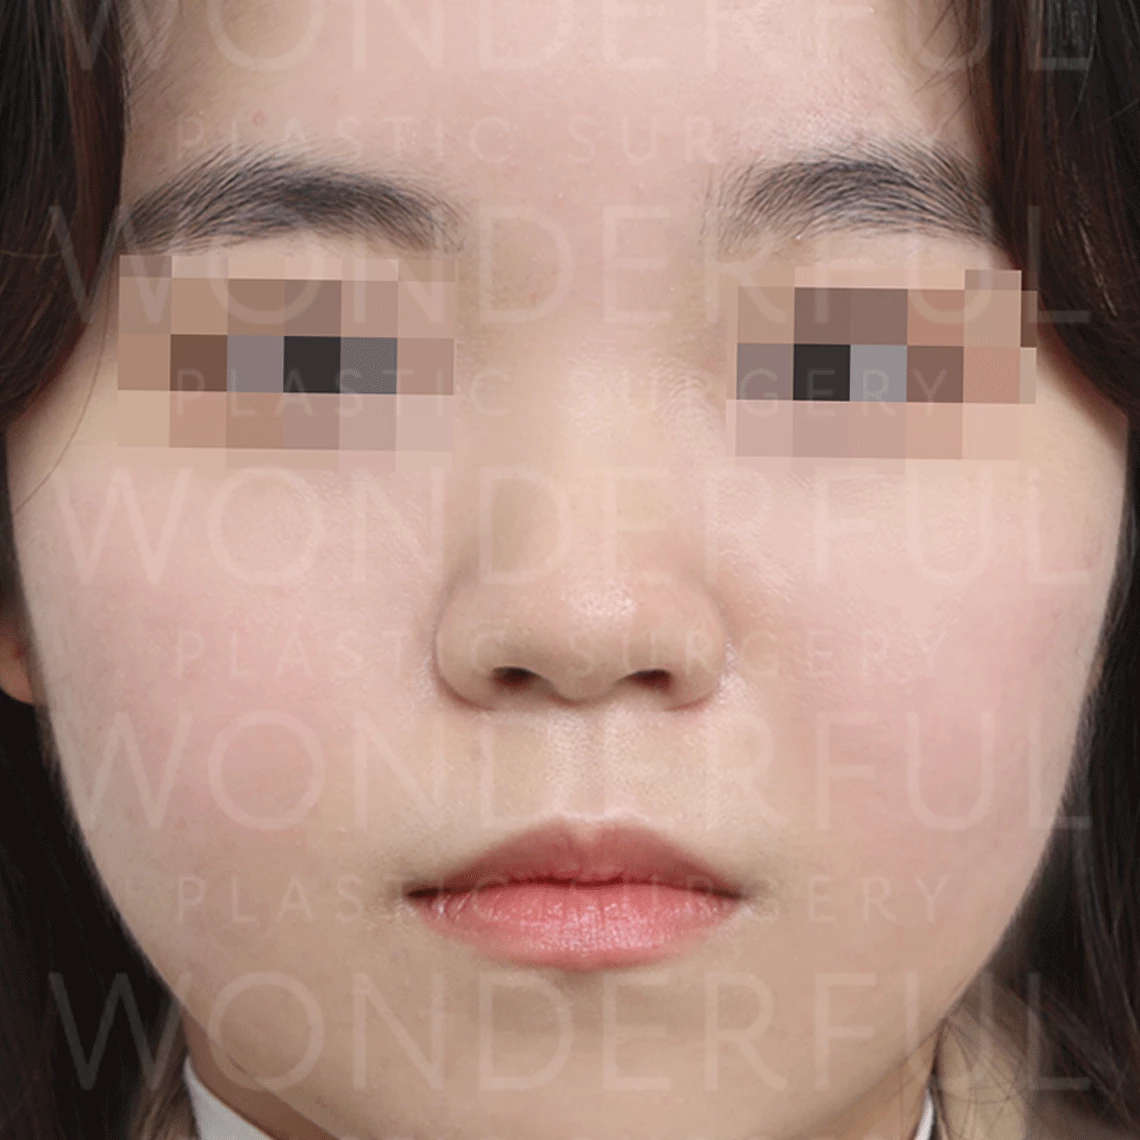 wonderful-plastic-surgery-hospital-korea-nose-rhinoplasty-before-after-results-before-1